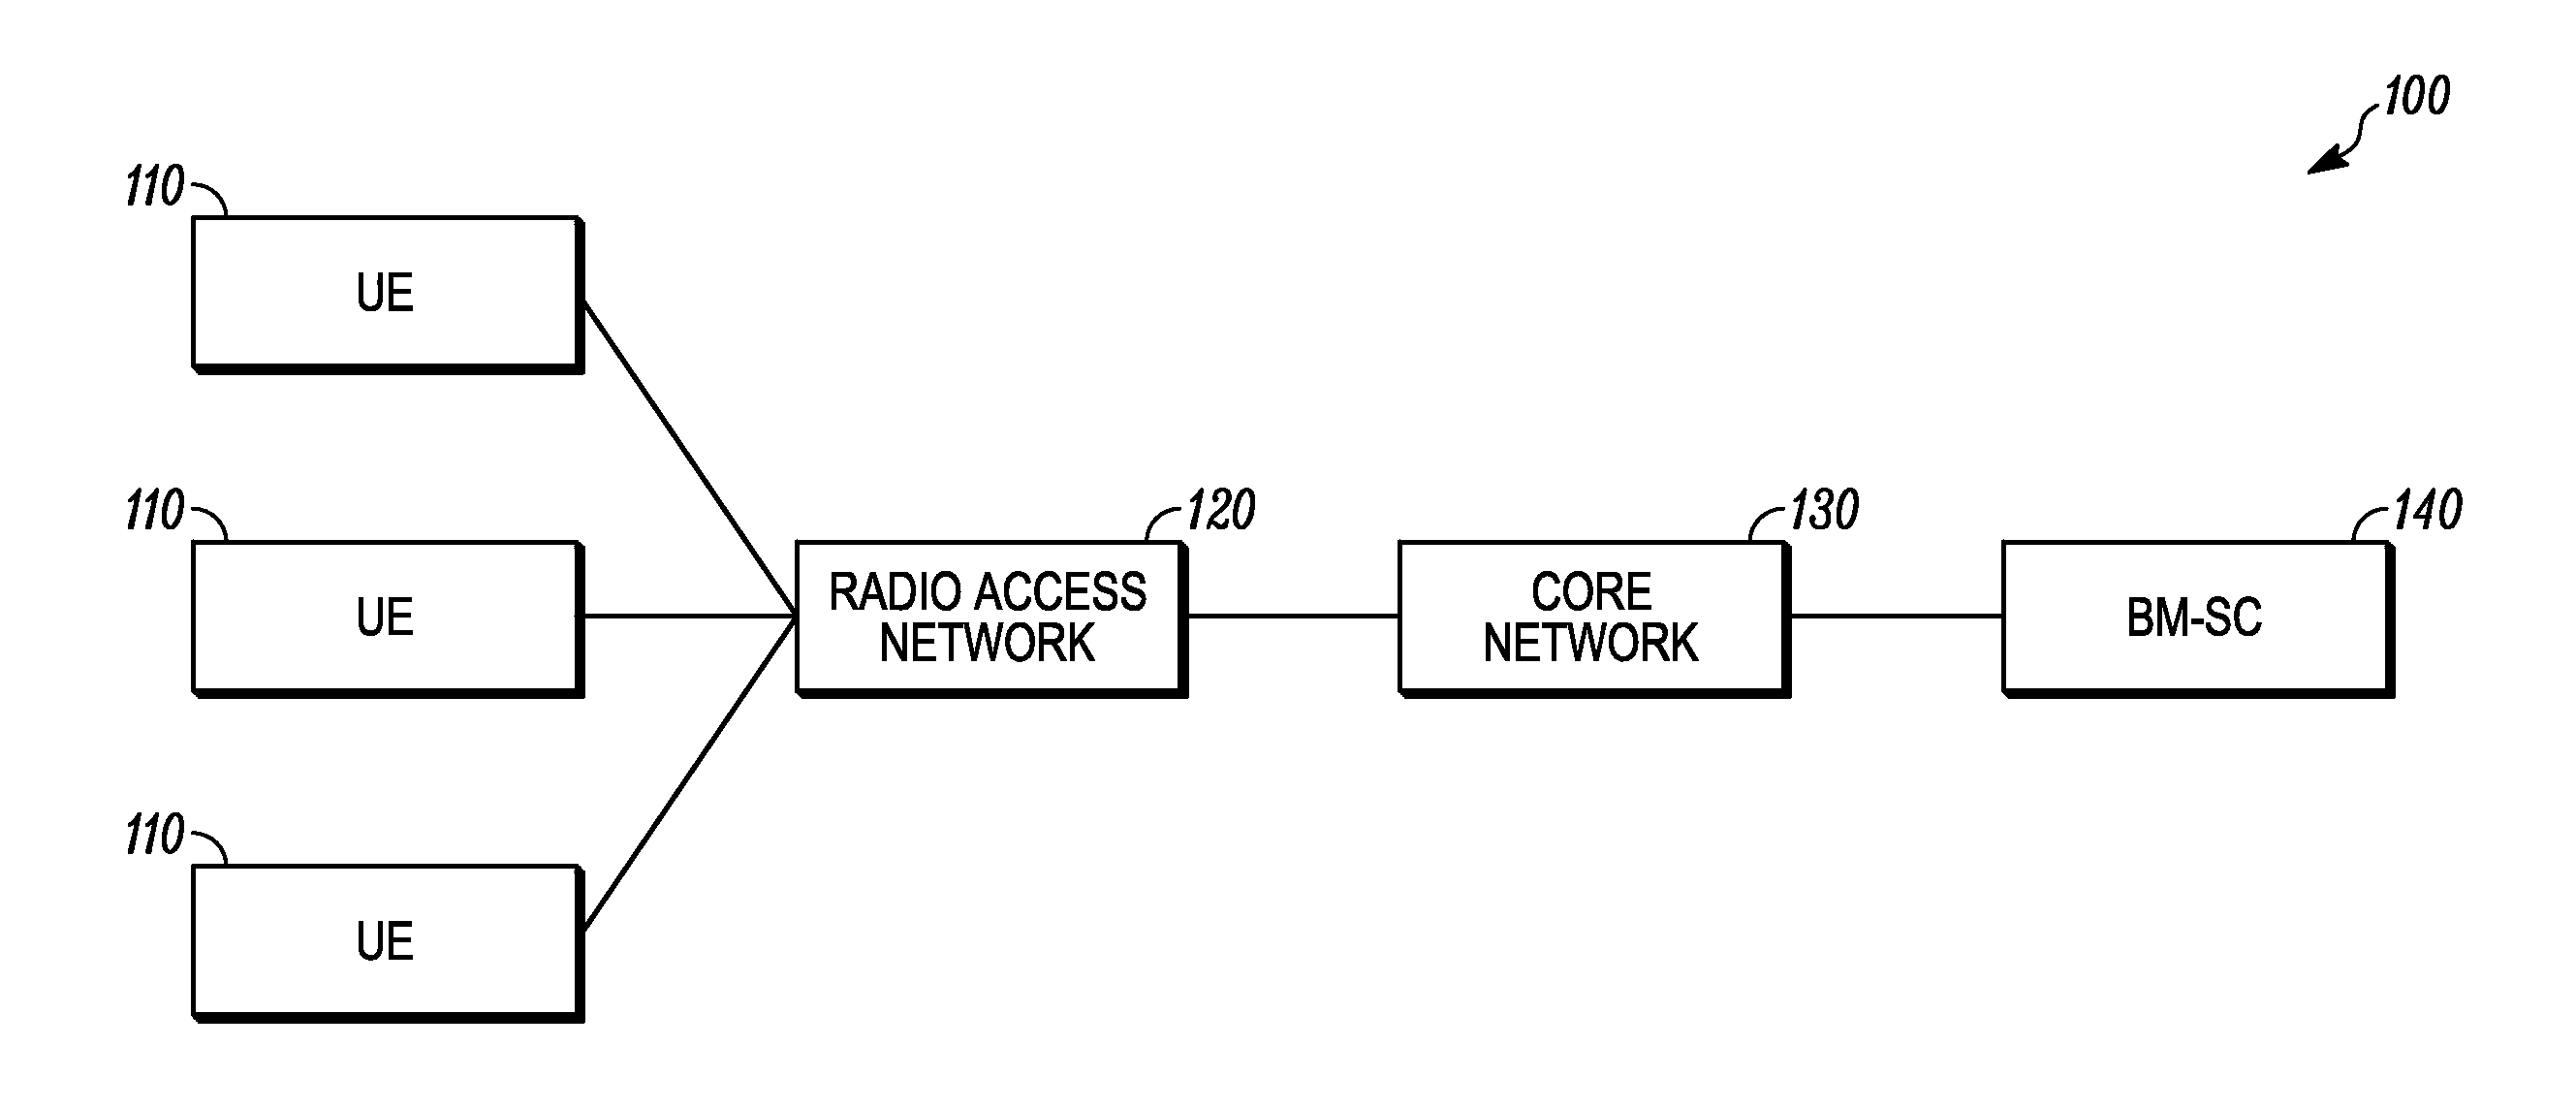 Method to control a multimedia broadcast multicast service(MBMS) mode of a MBMS session in a communication system